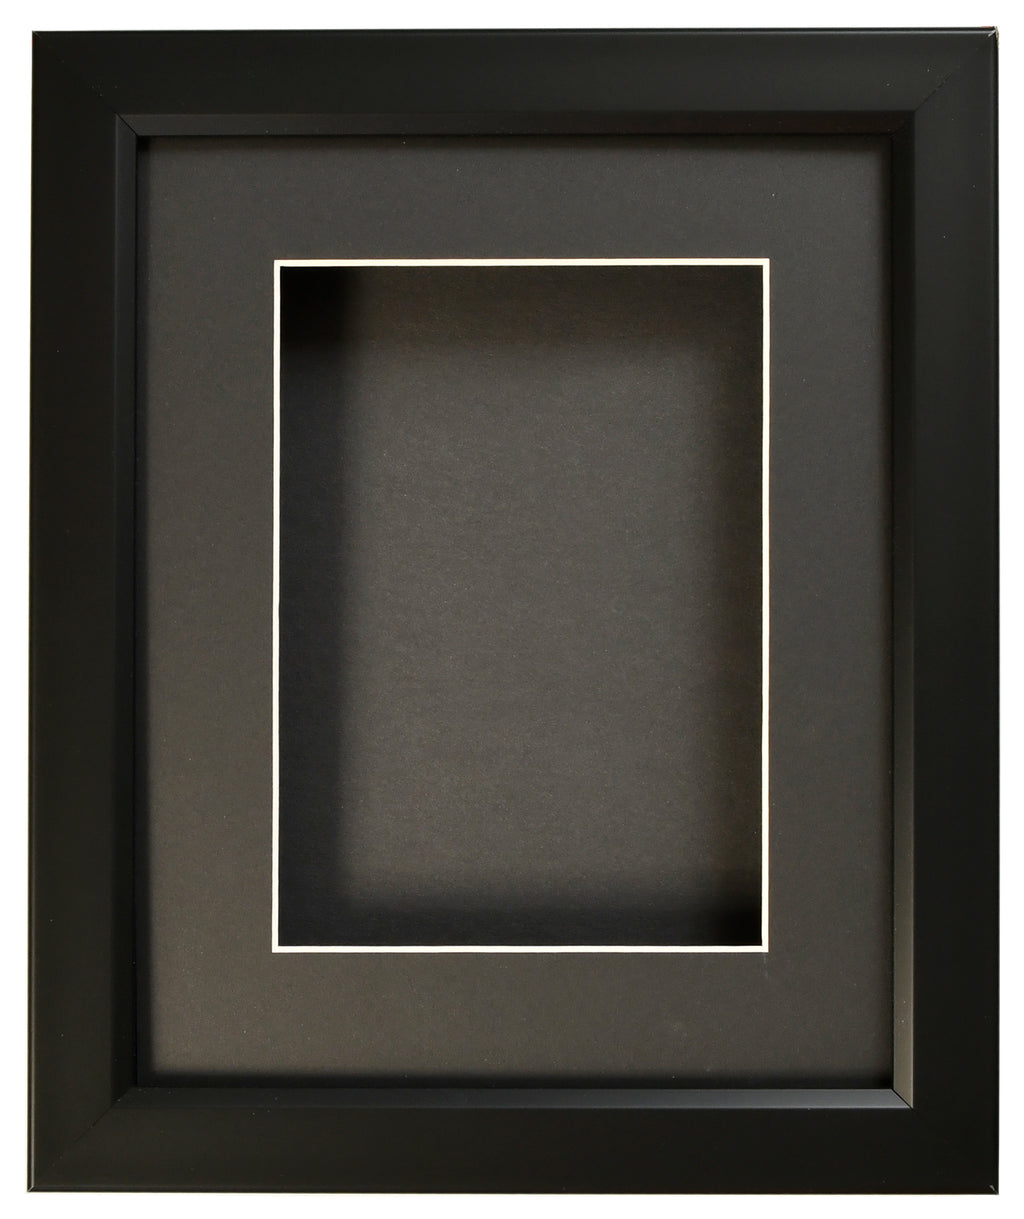 SHADOW BOX FRAME FOR OBJECTS - BLACK FRAME, BLACK MAT - CLEAR GLASS - 1"  DEPTH